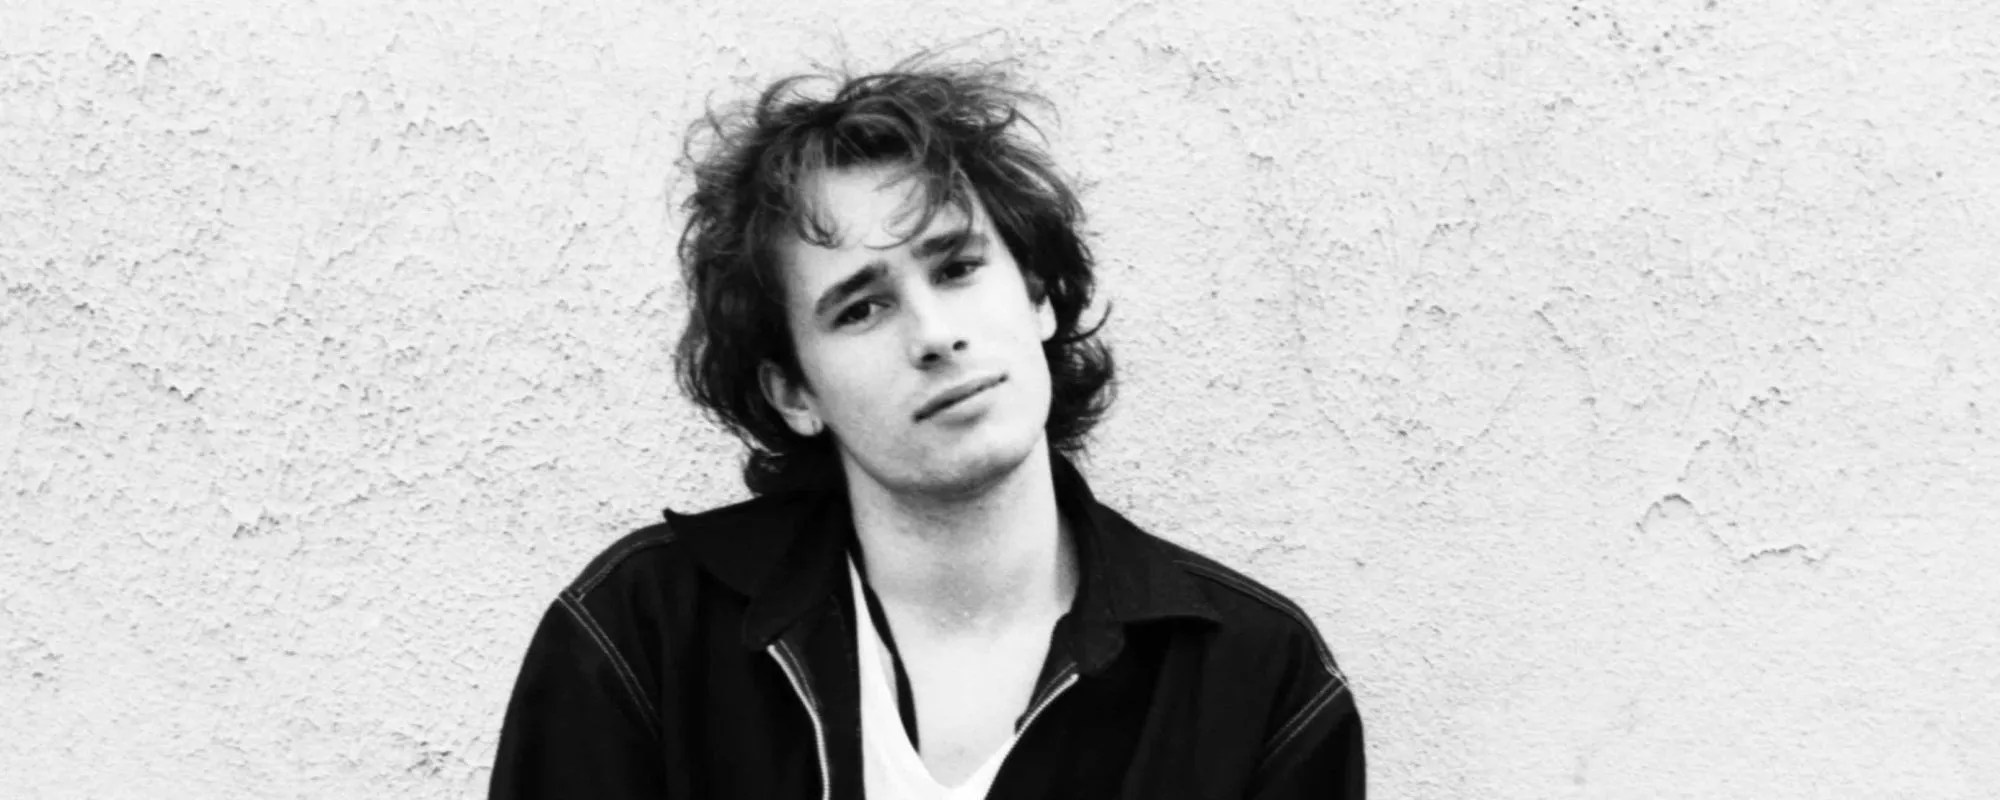 3 Songs You Didn’t Know Jeff Buckley Wrote Solo for His Iconic LP ‘Grace’